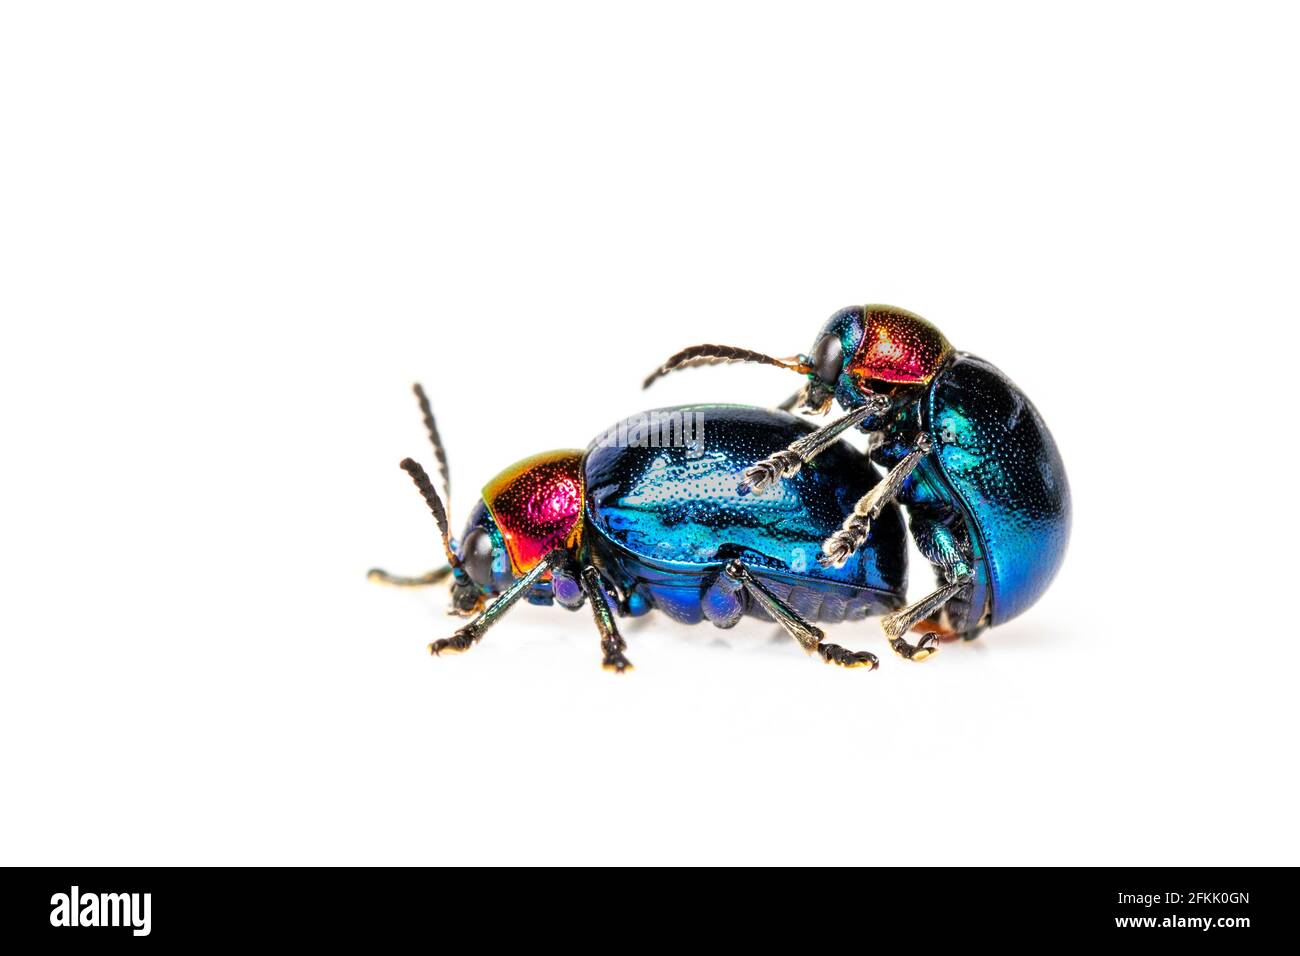 Image Of Blue Milkweed Beetle It Has Blue Wings And A Red Head Couple Make Love On White